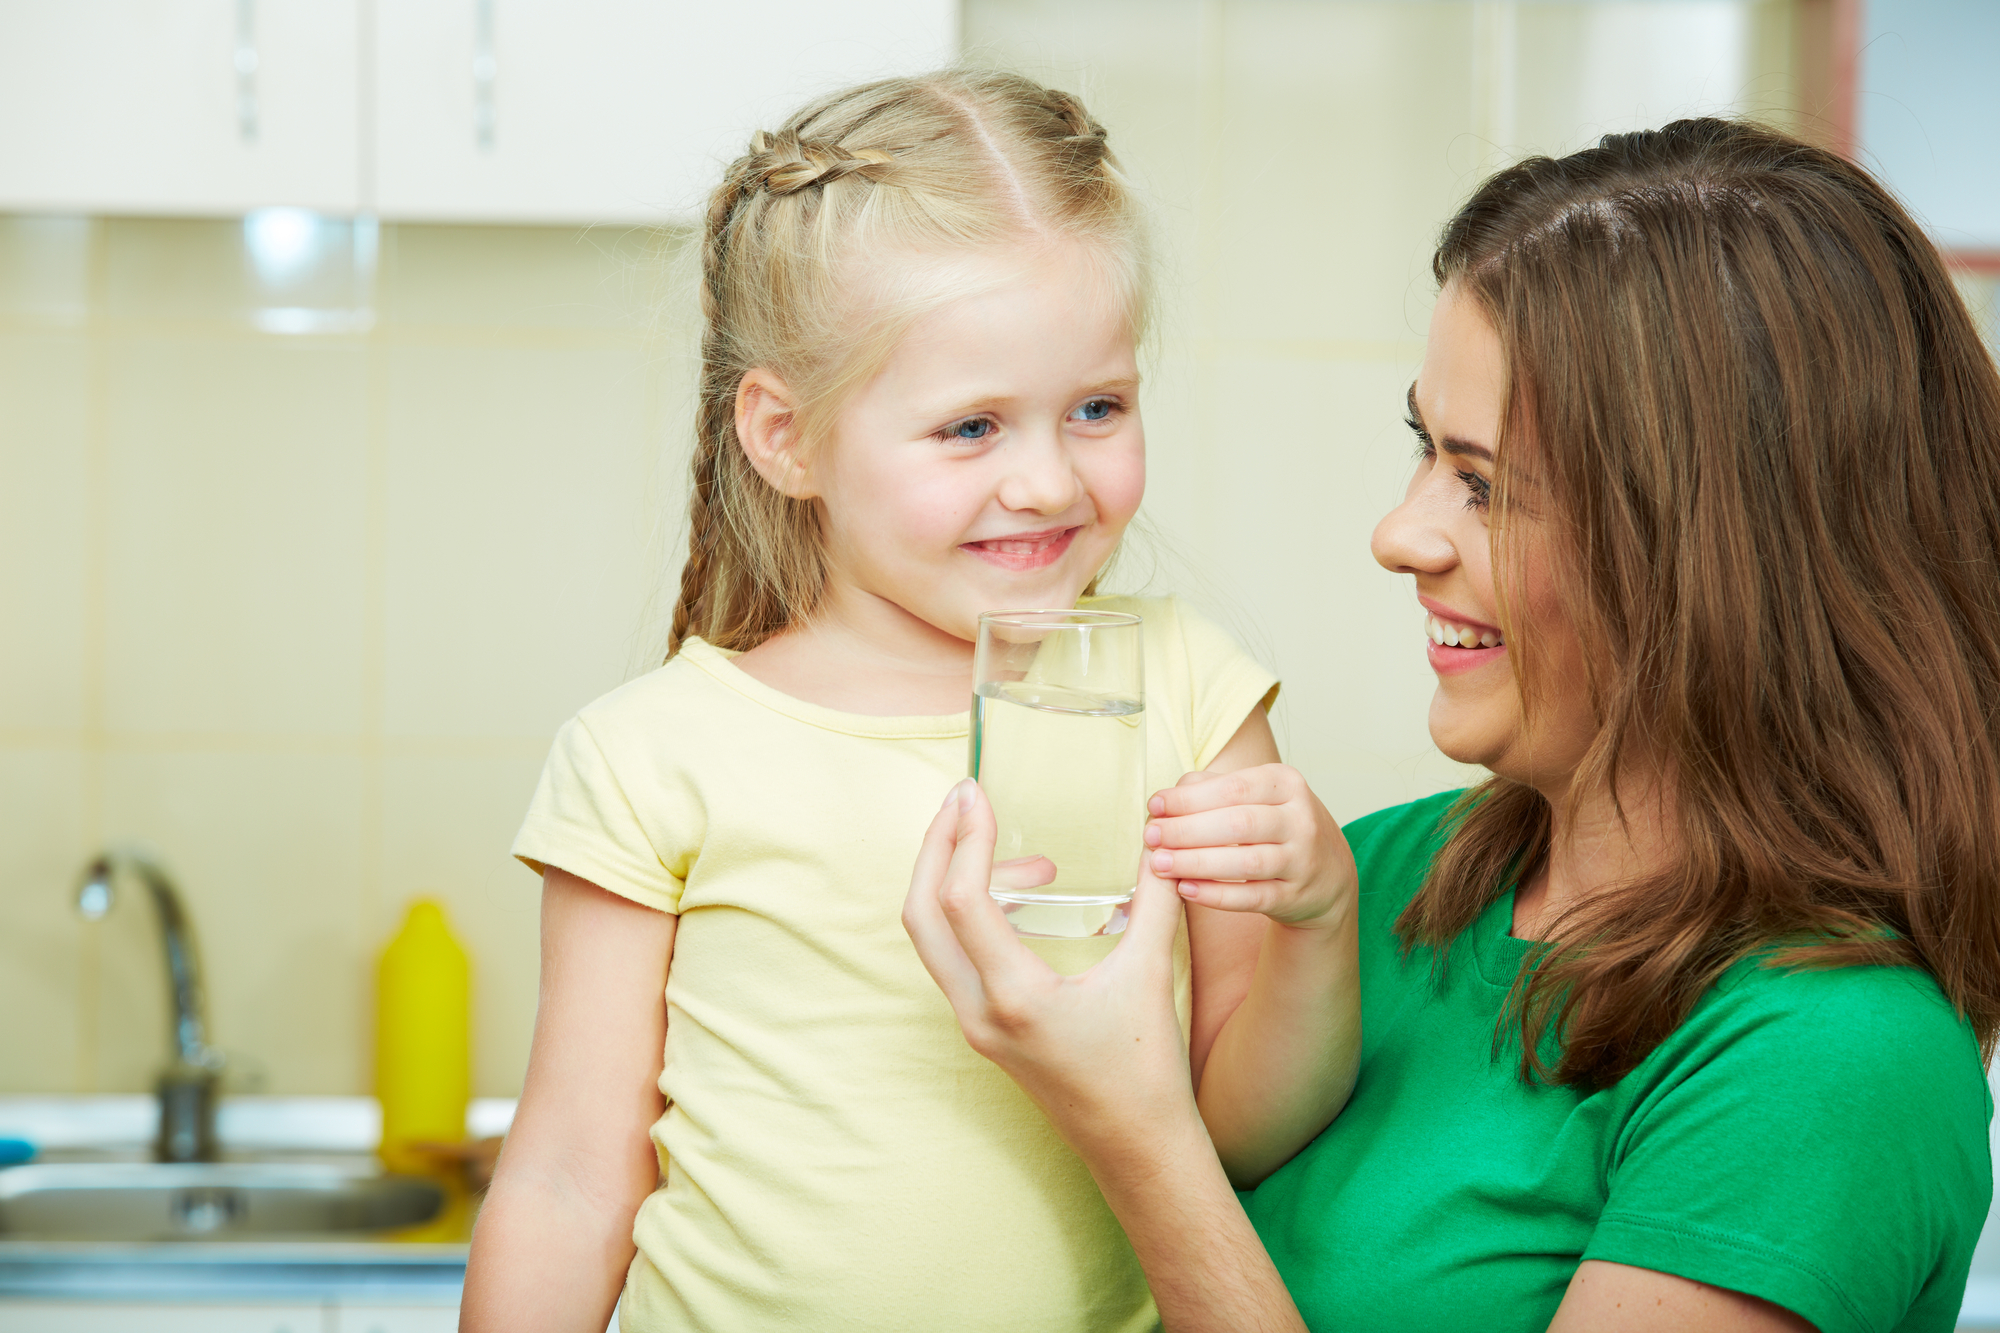 Inexpensive Water Filtration Helps Keep Your Family Safe